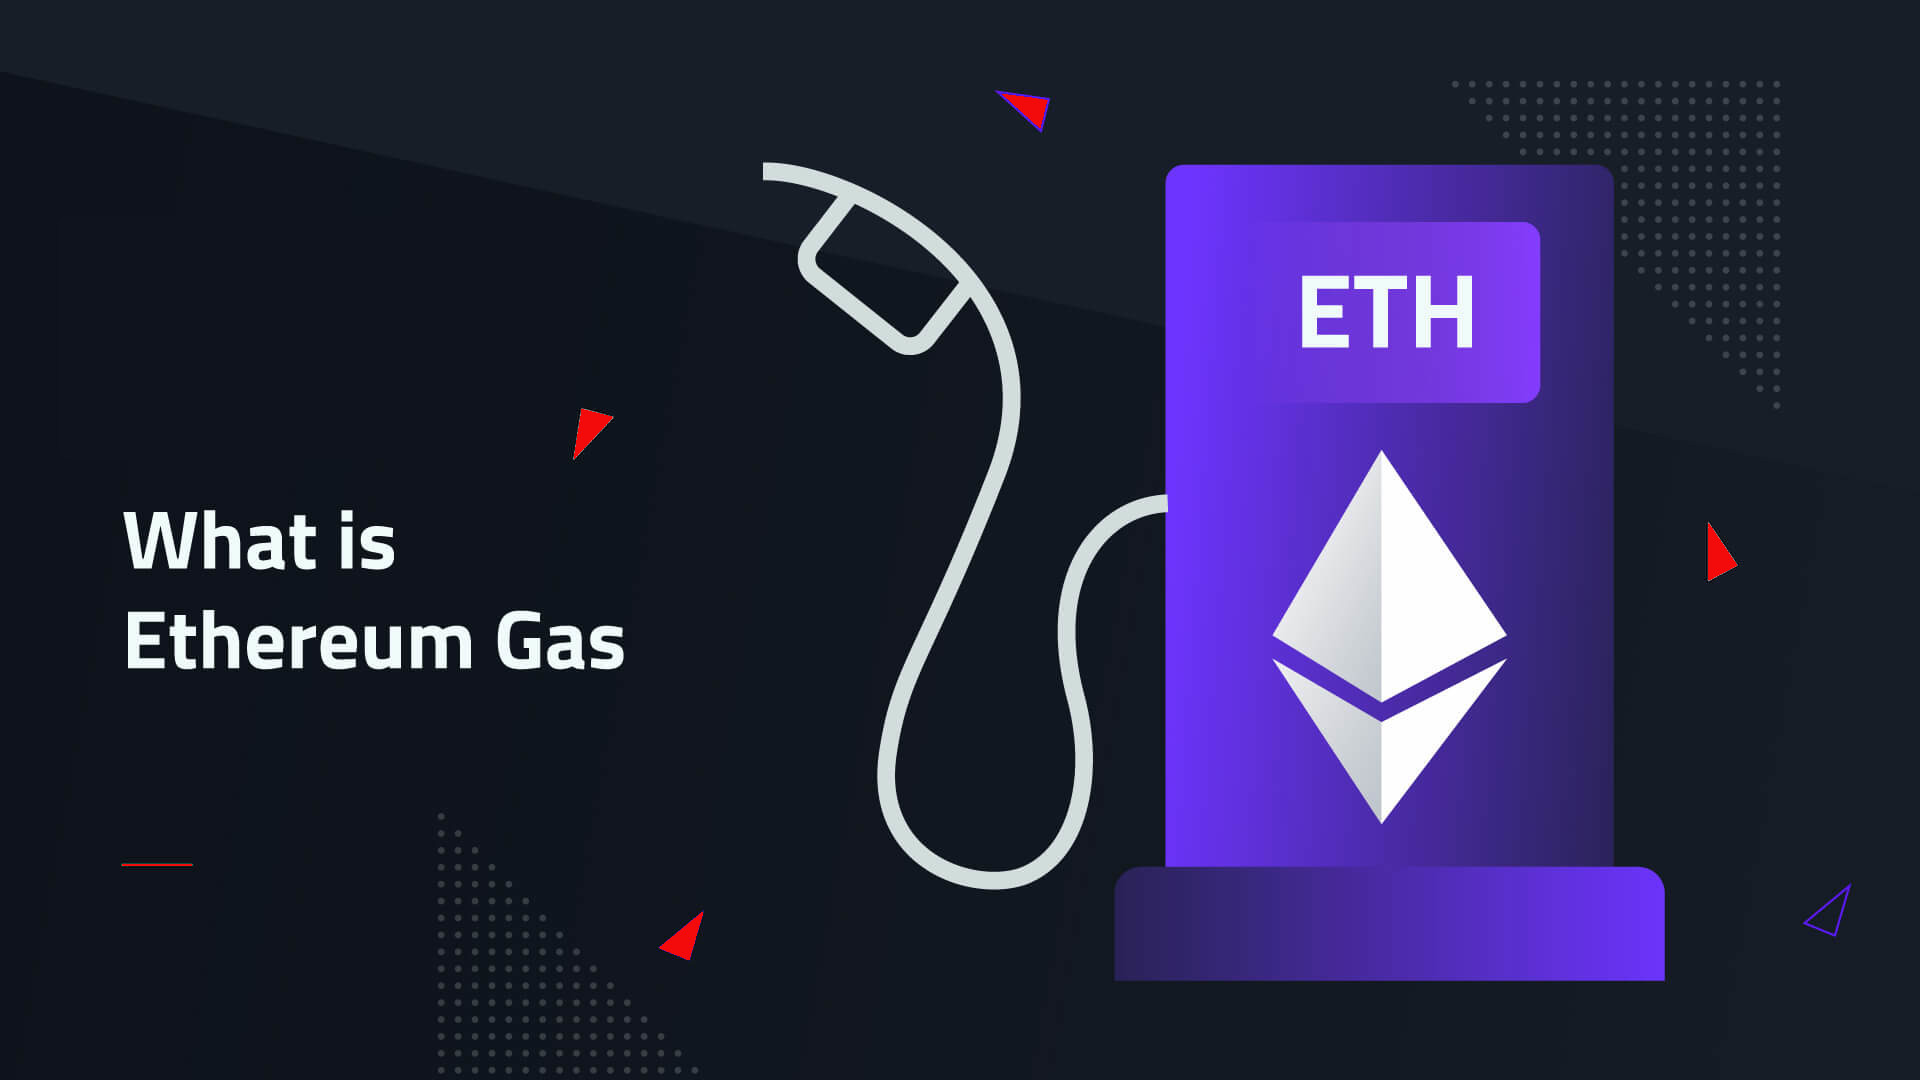 On the Ethereum blockchain, gas refers to the cost necessary to perform a transaction on the network.